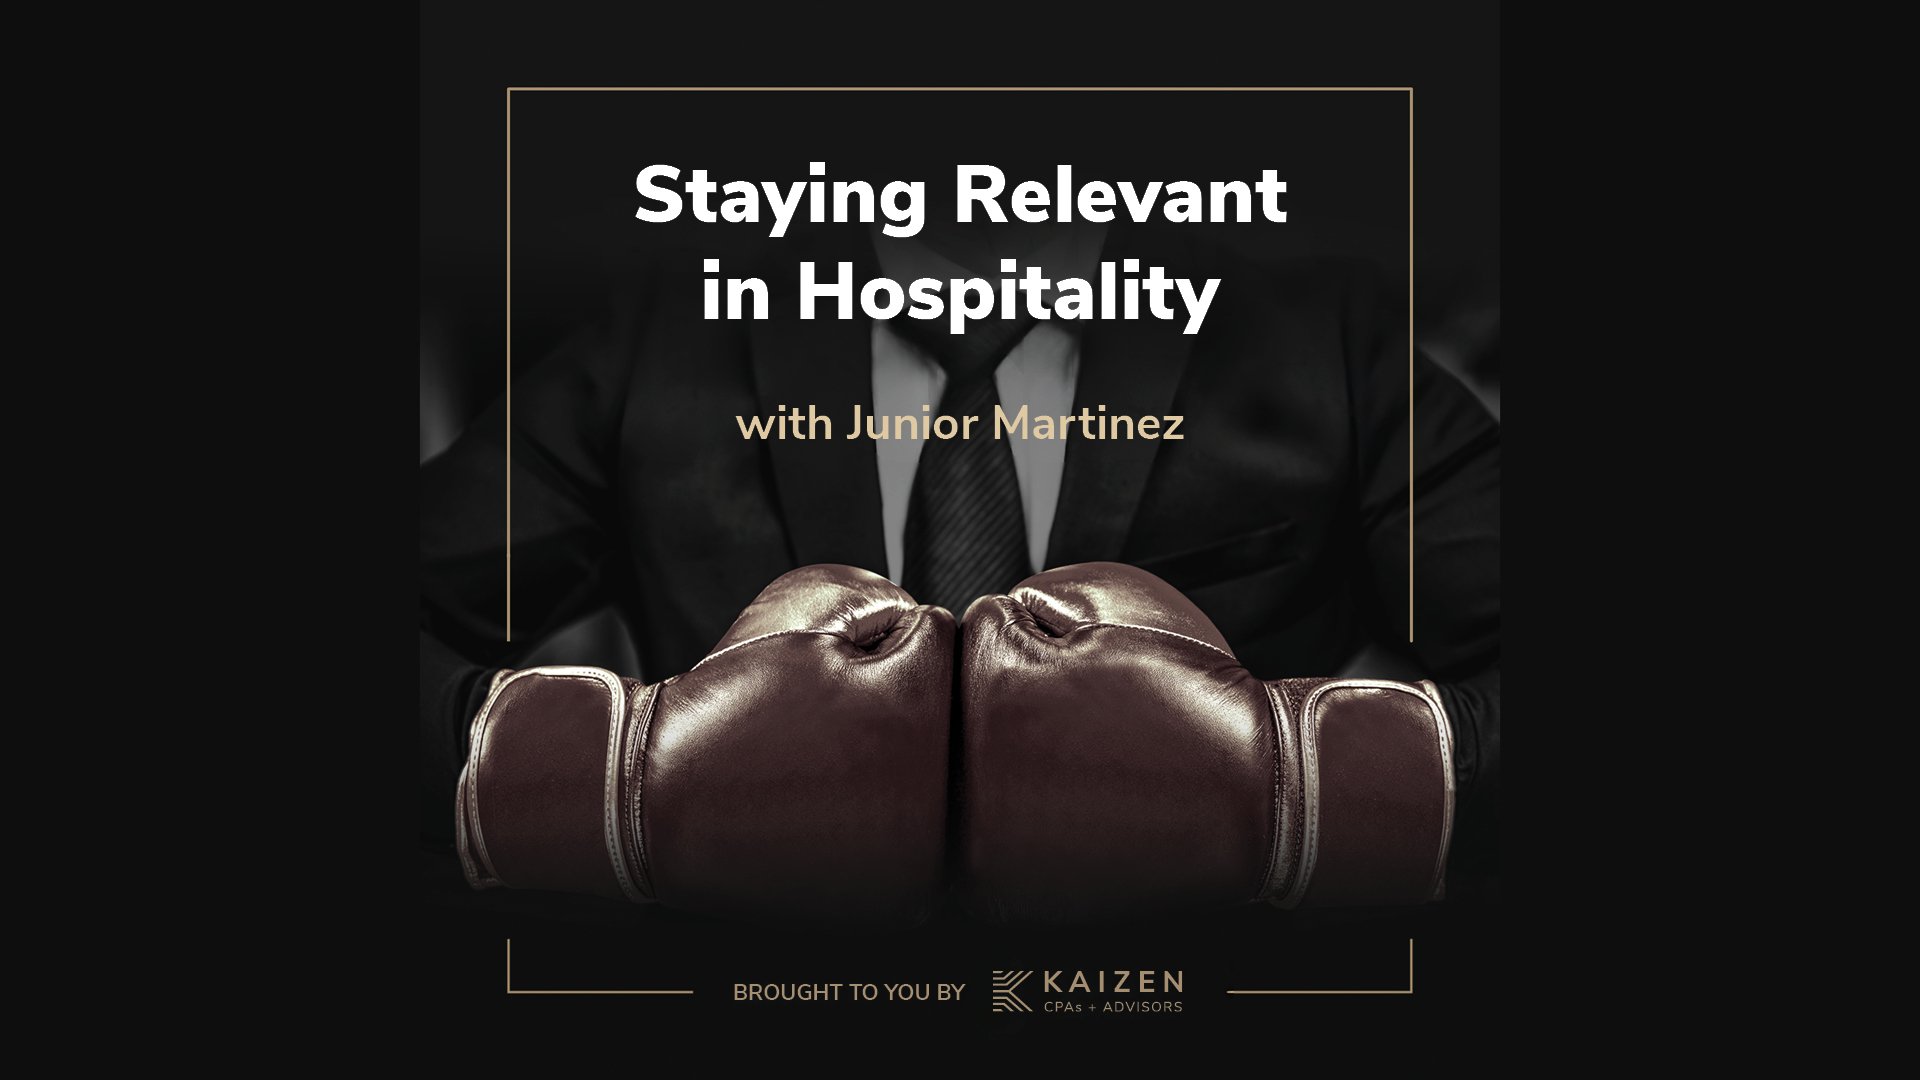 Staying Relevant in Hospitality